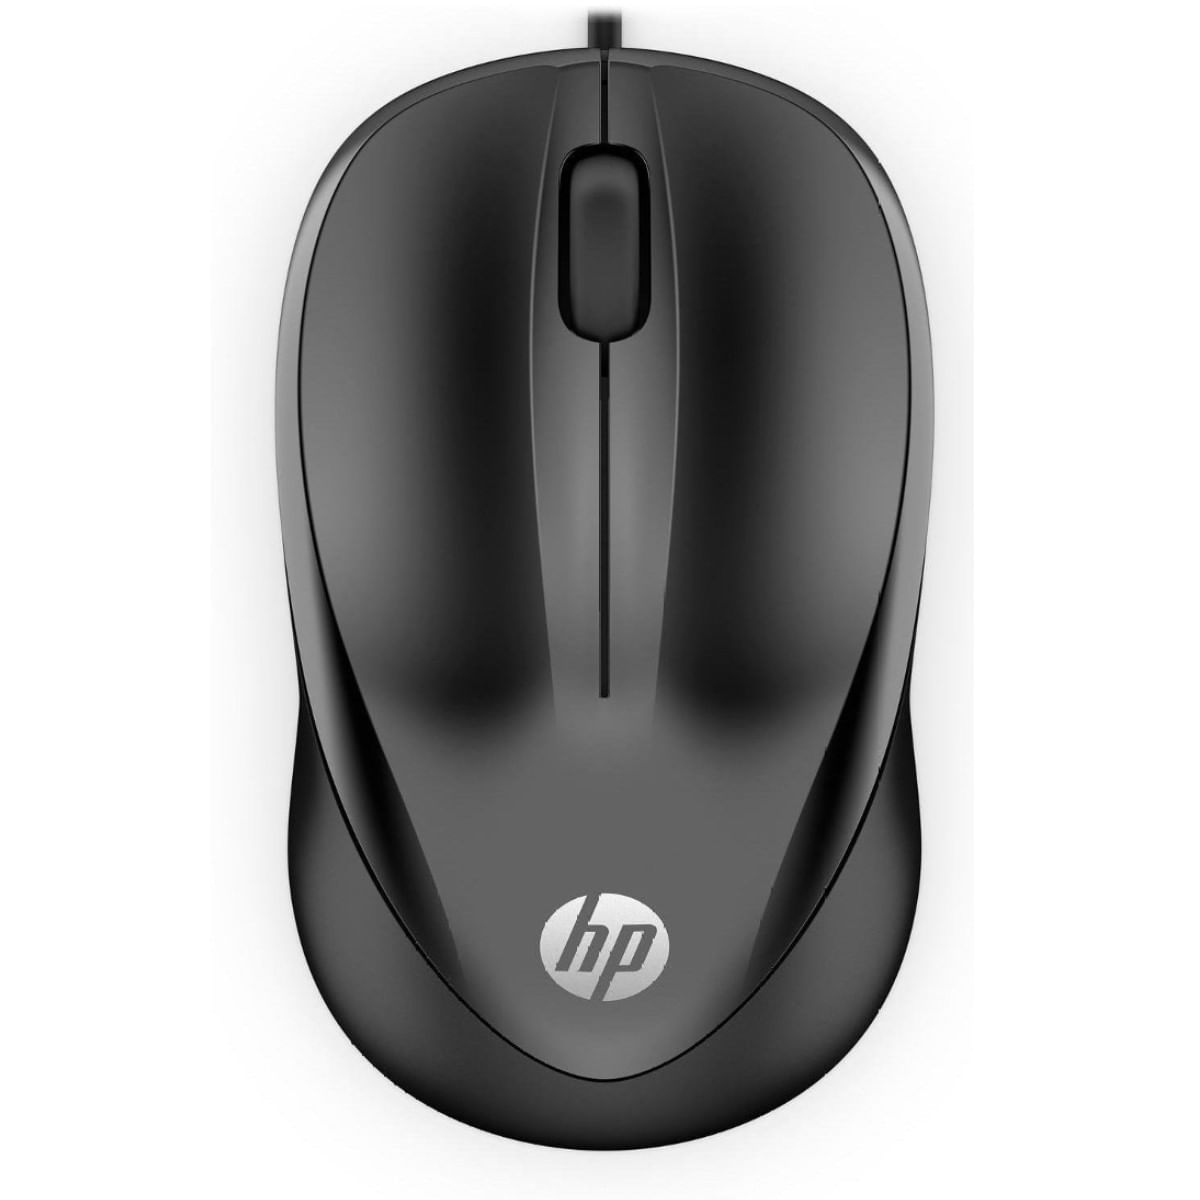 Mouse HP 1000 Wired 1200dpi Alámbrico USB Negro - 4QM14AA#ABL